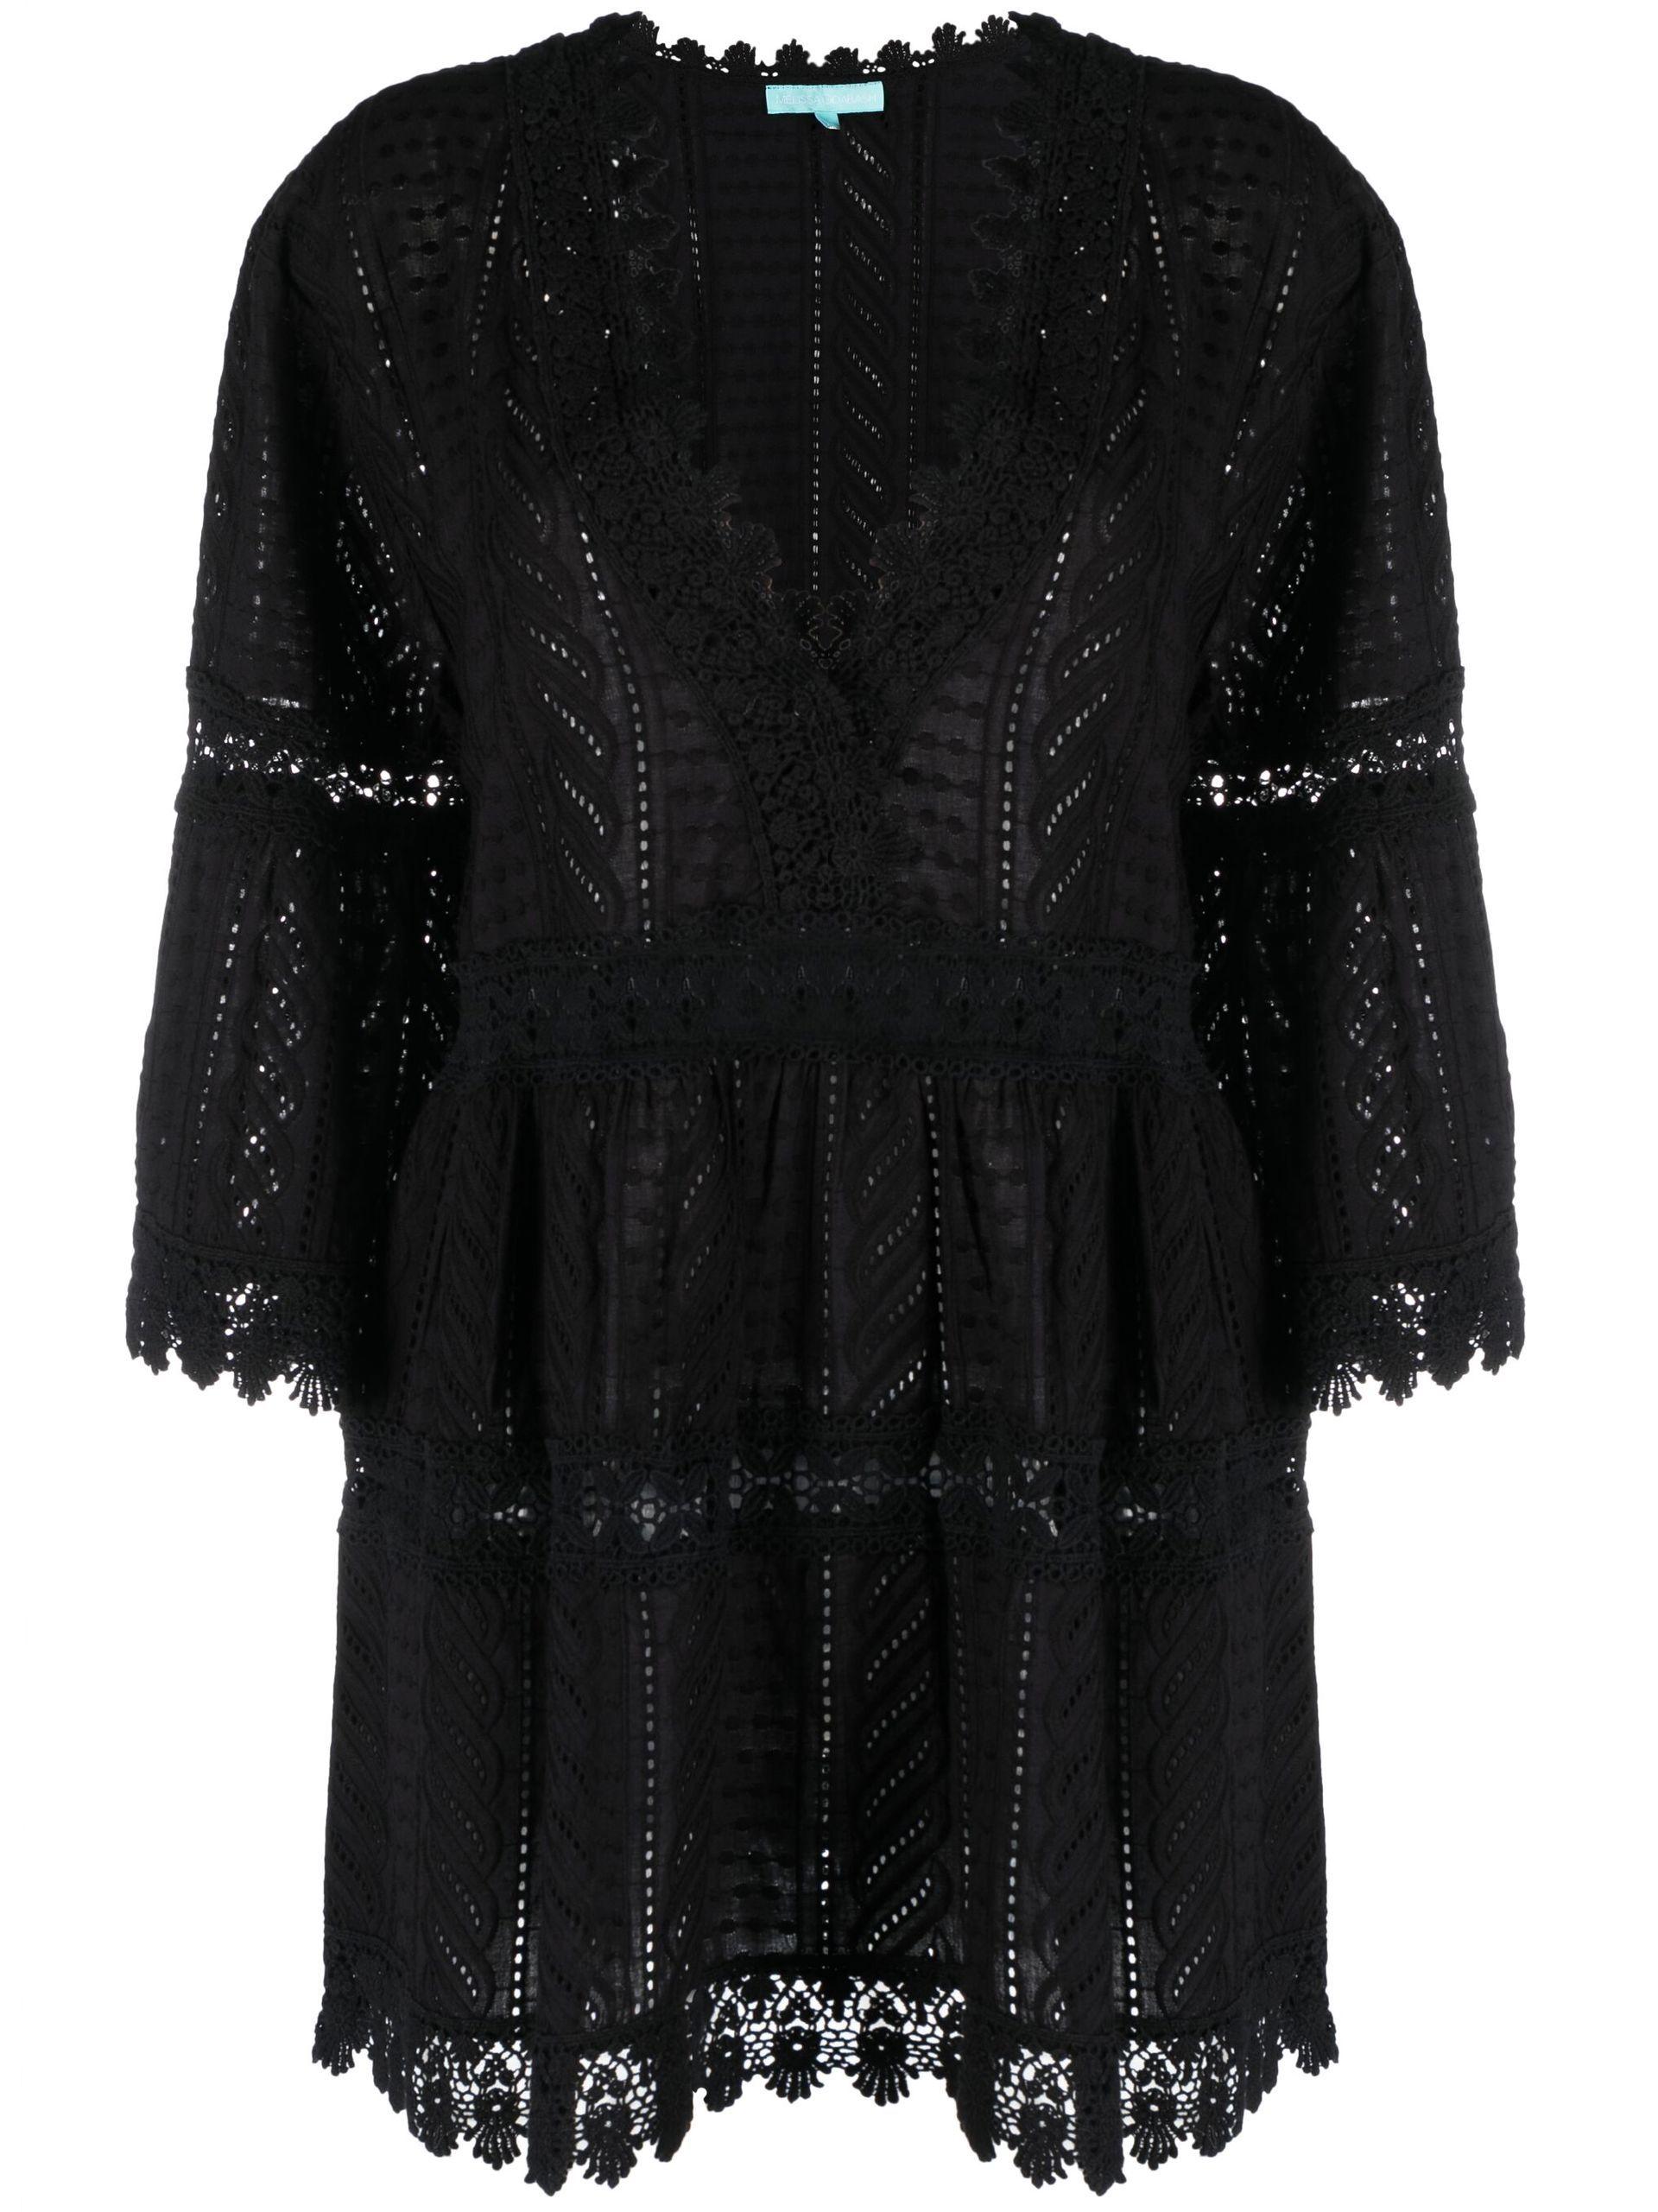 Melissa Odabash Victoria Broderie Anglaise Cotton Dress in Black | Lyst